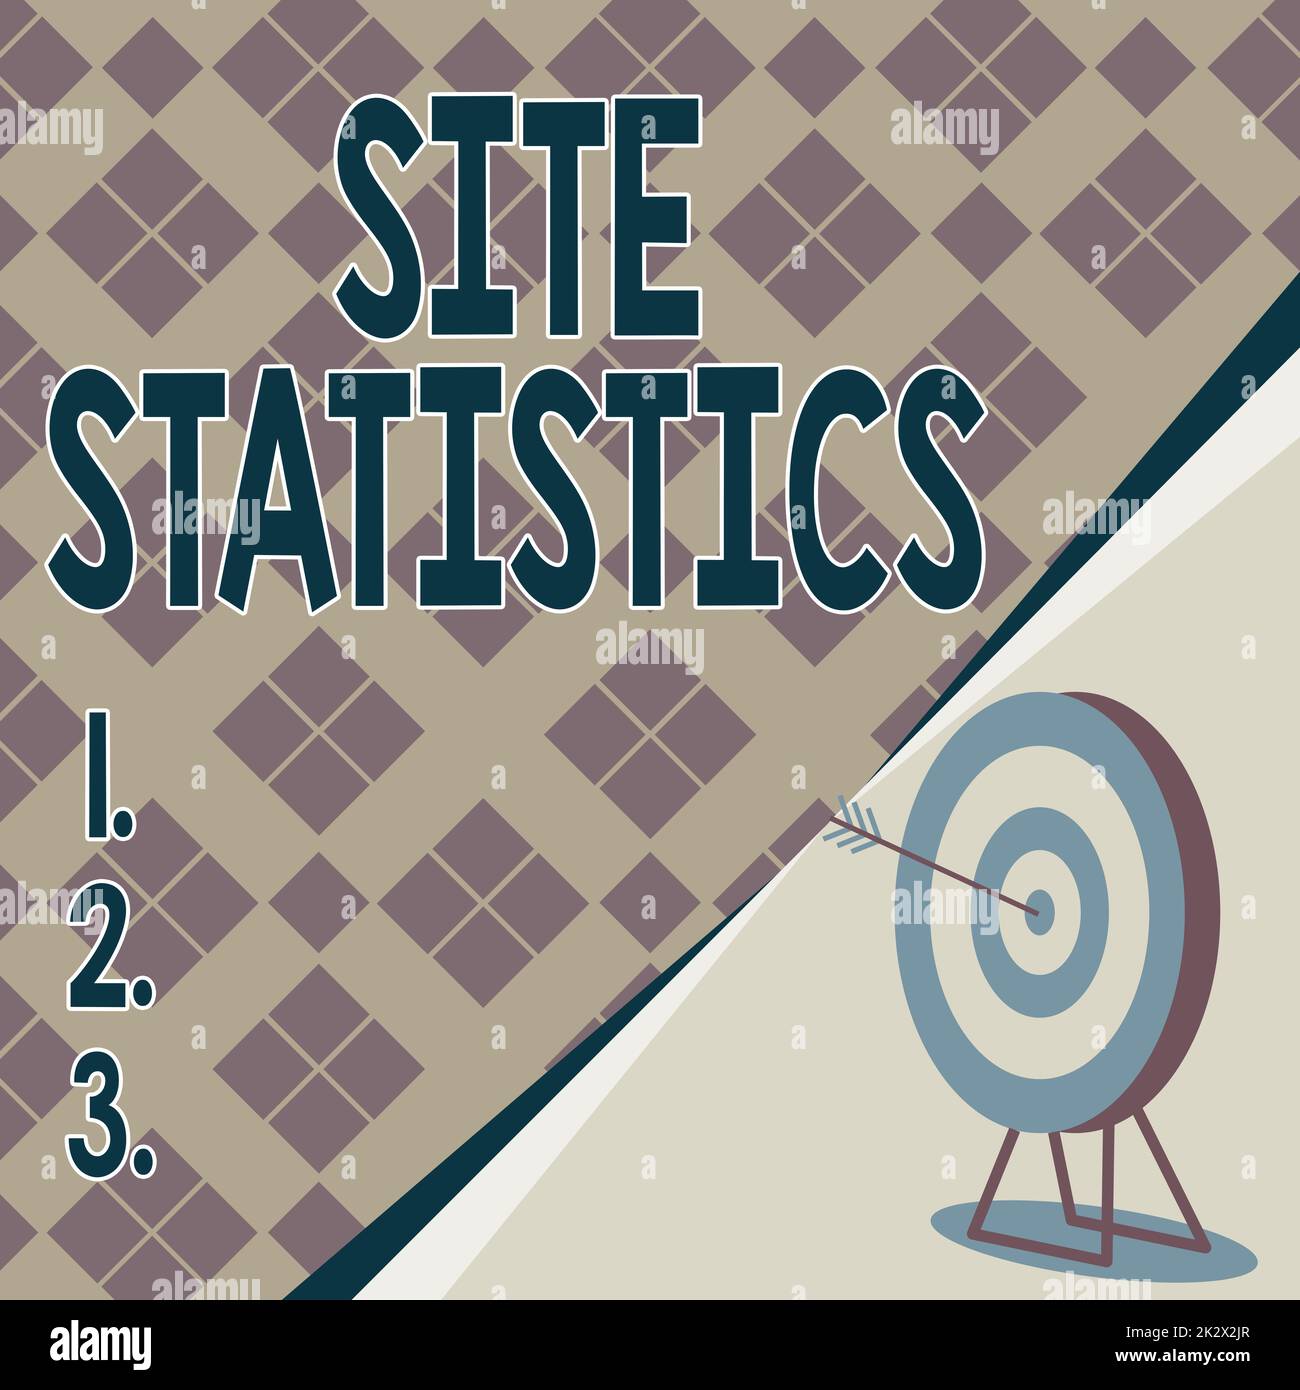 Sign displaying Site Statistics. Concept meaning measurement of behavior of visitors to certain website Target With Bullseye Representing Successfully Completed Project. Stock Photo